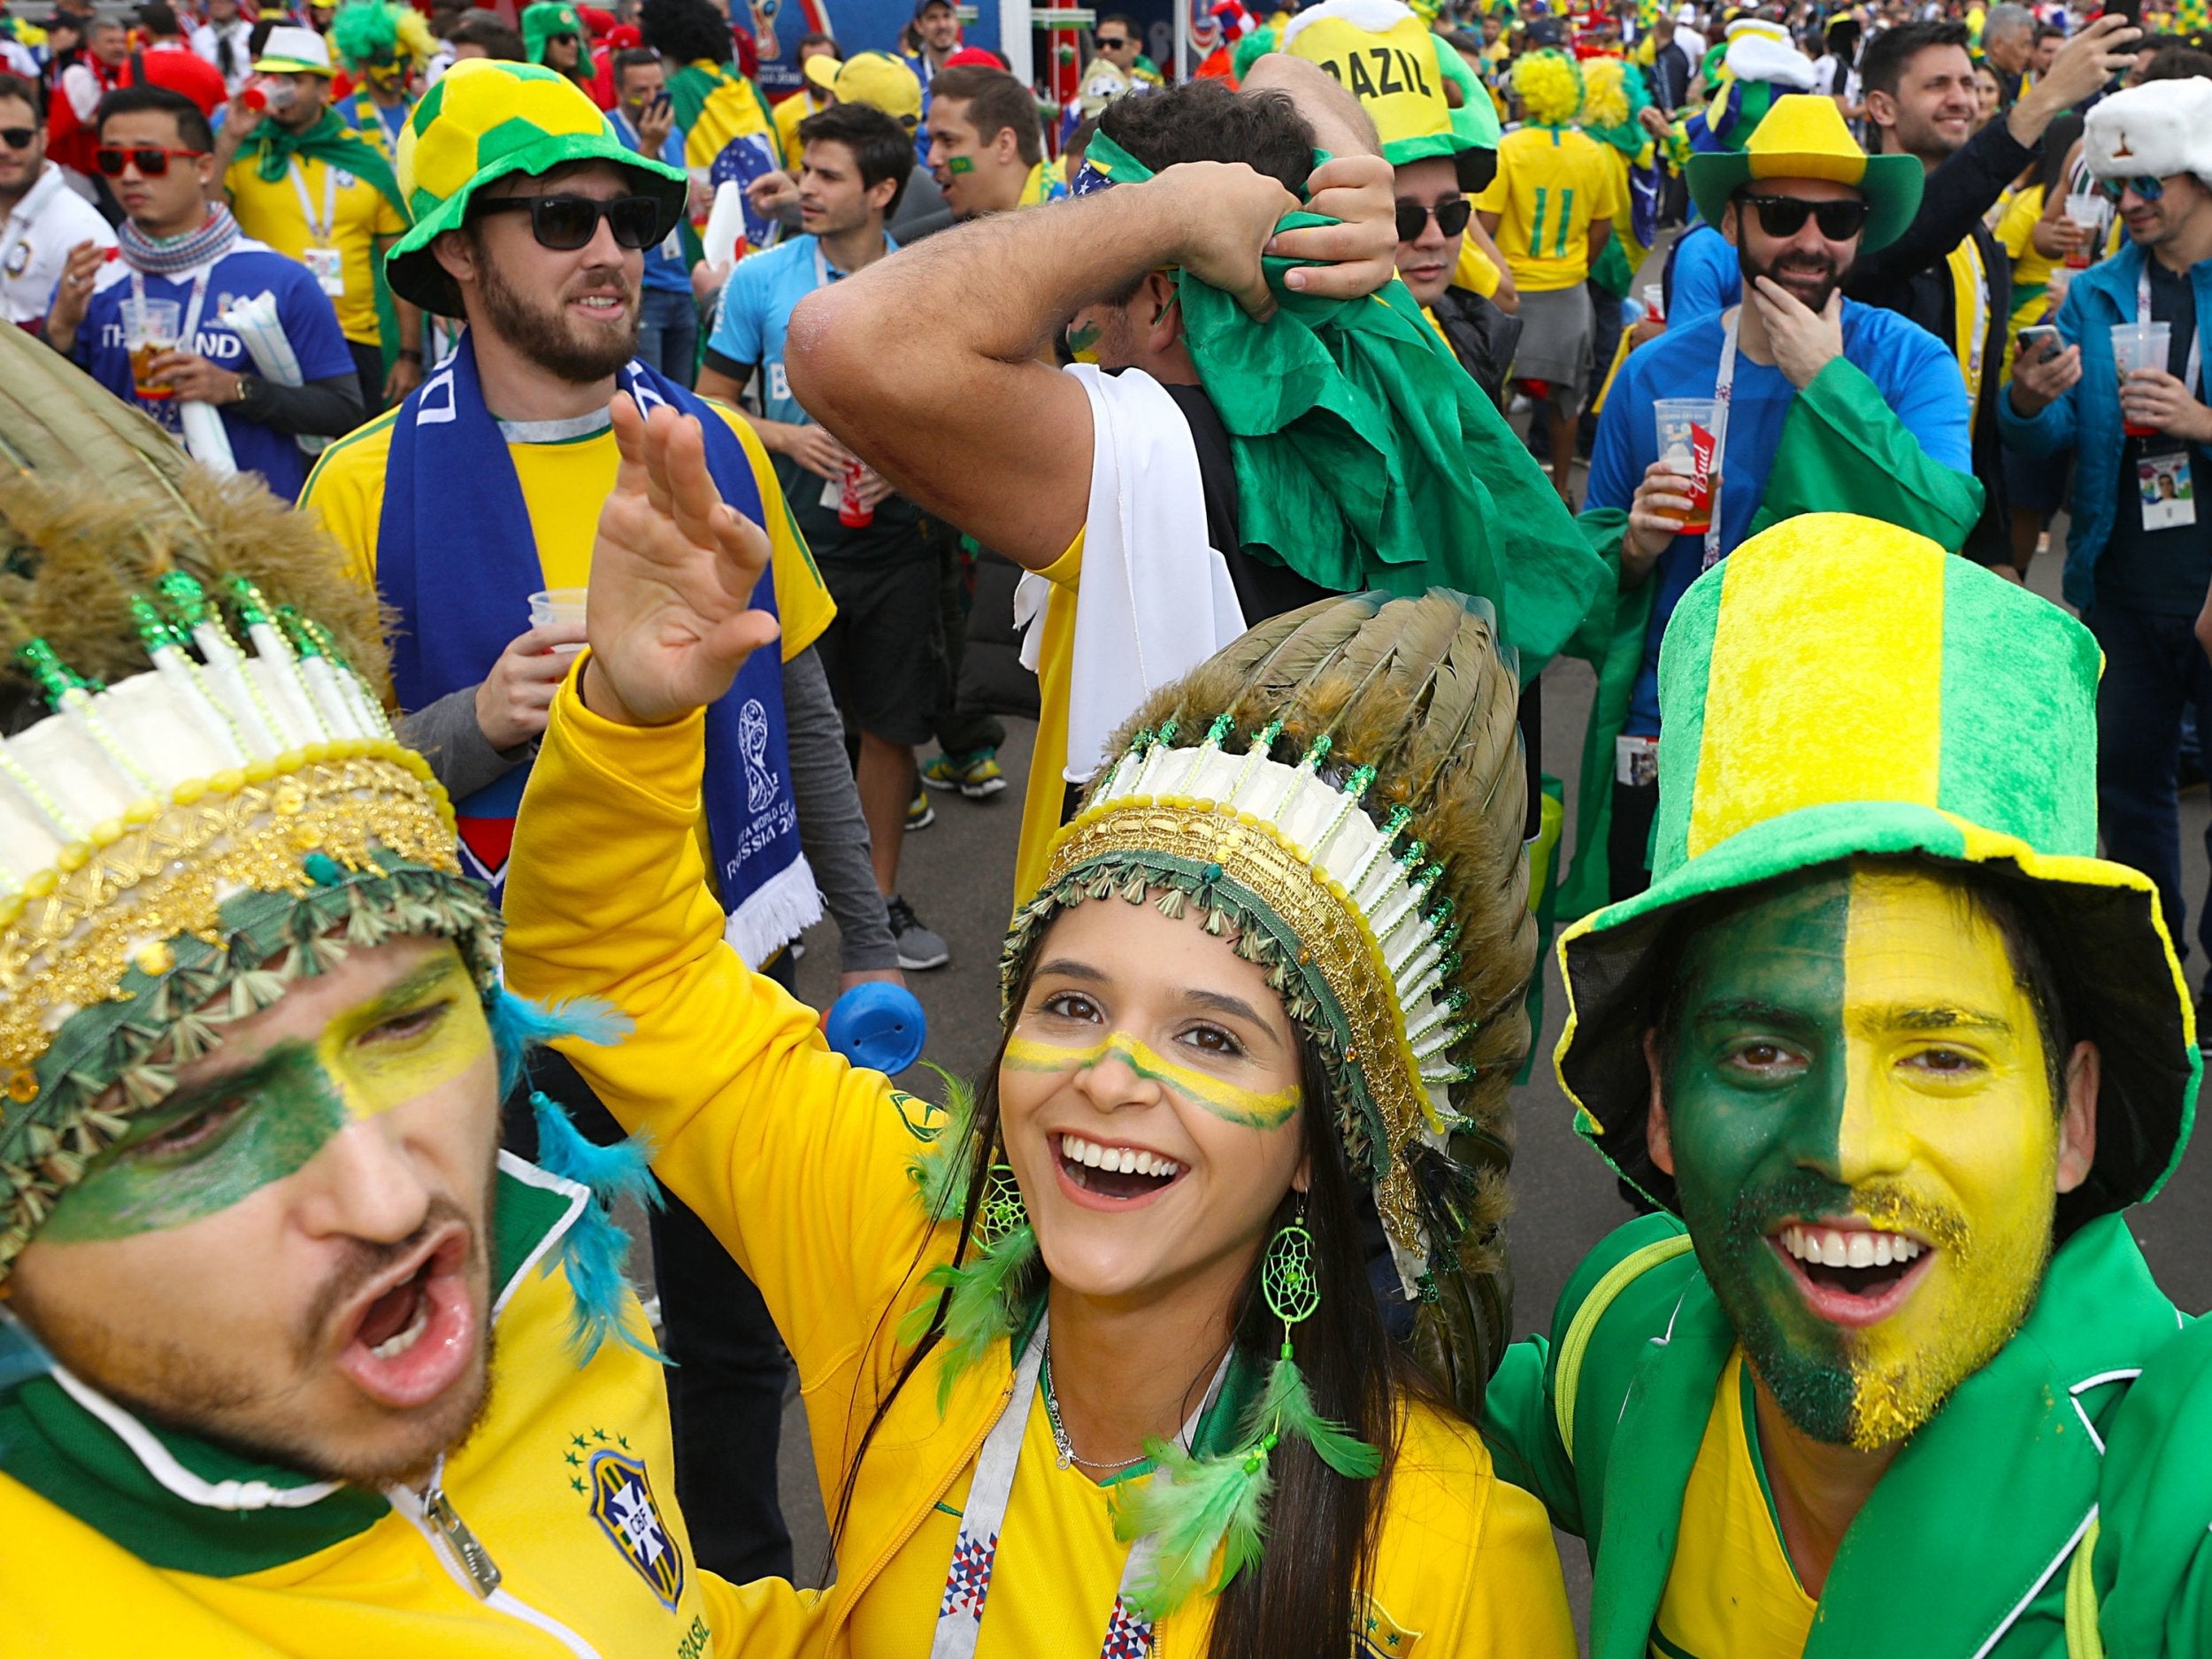 Brazil vs Costa Rica, LIVE World Cup 2018: Prediction, how to watch online, what time, what channel, team news, betting odds - Neymar starts